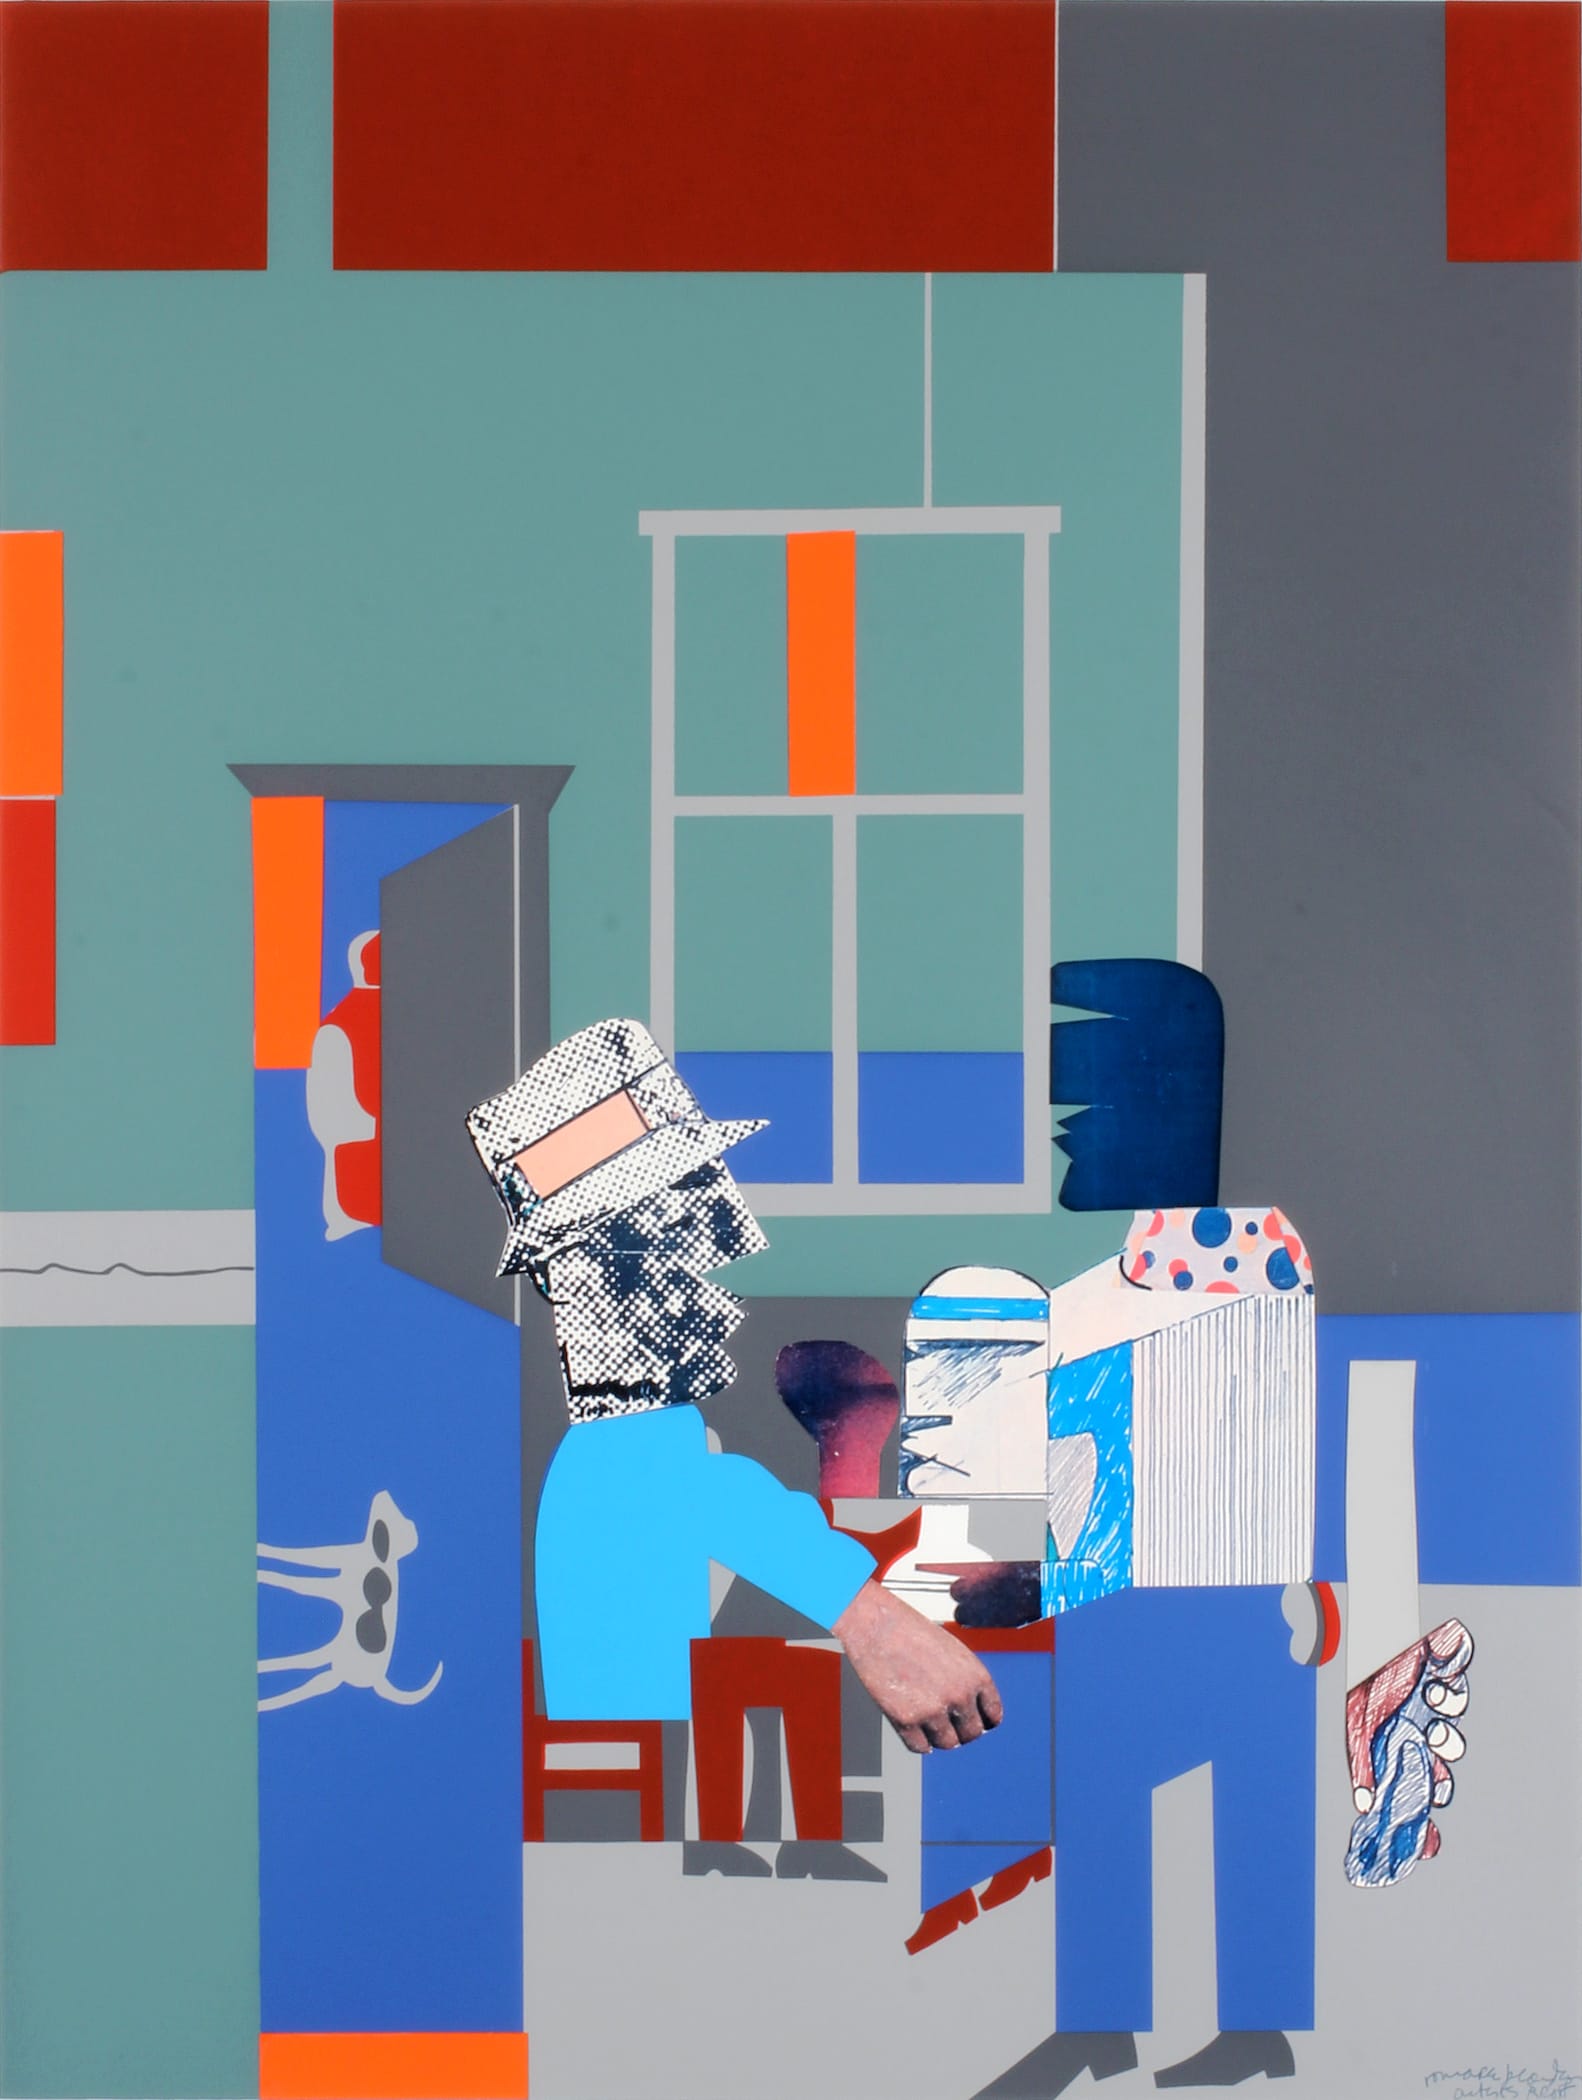 Romare Bearden (American, 1911-1988) Carolina Blue Serigraph and collage on paper, 1970 Museum purchase (2015.16)